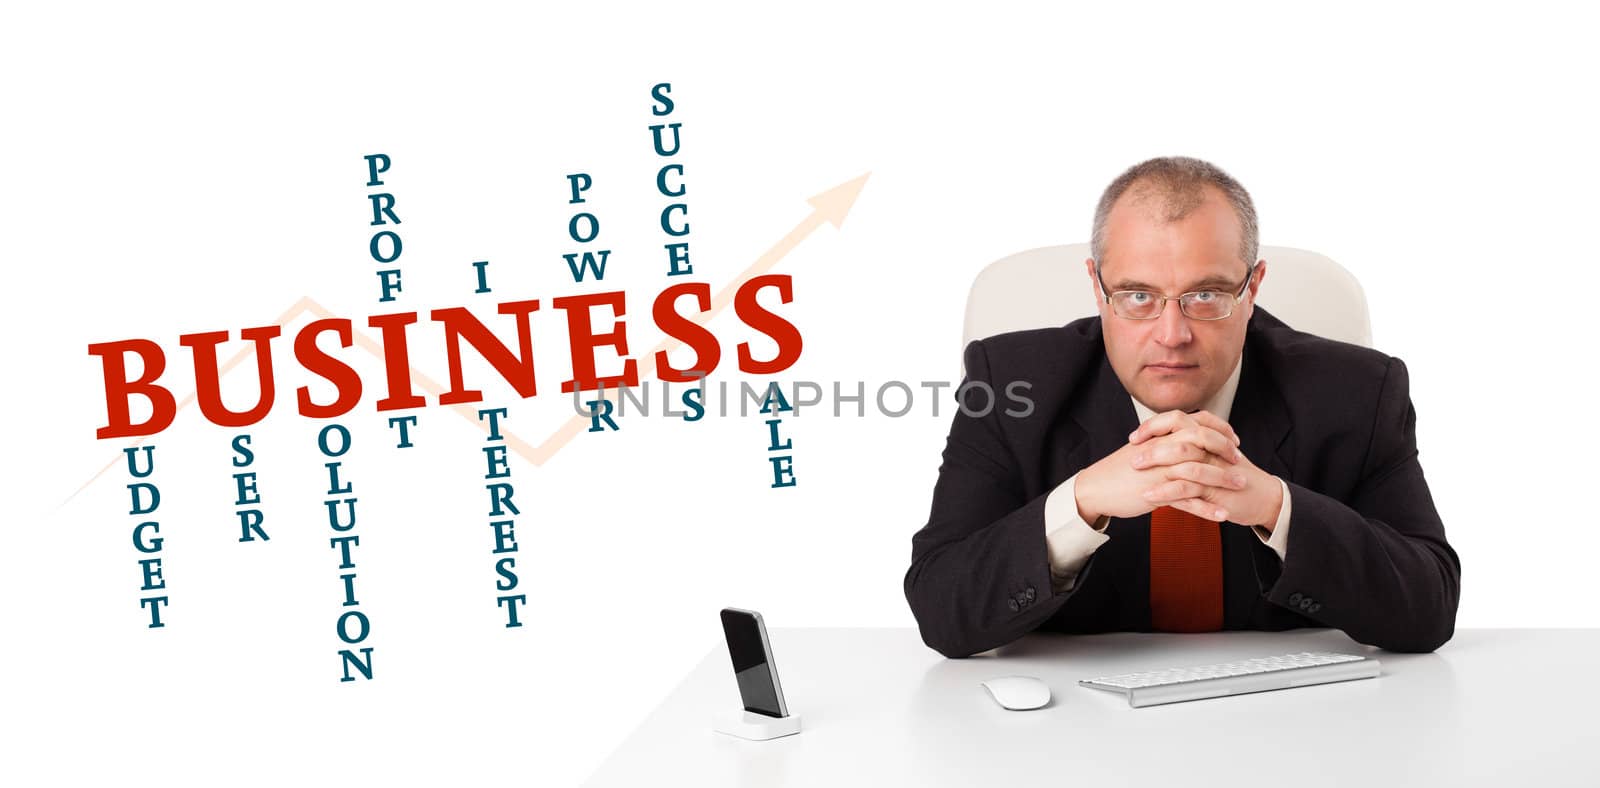 businesman sitting at desk with business word cloud by ra2studio